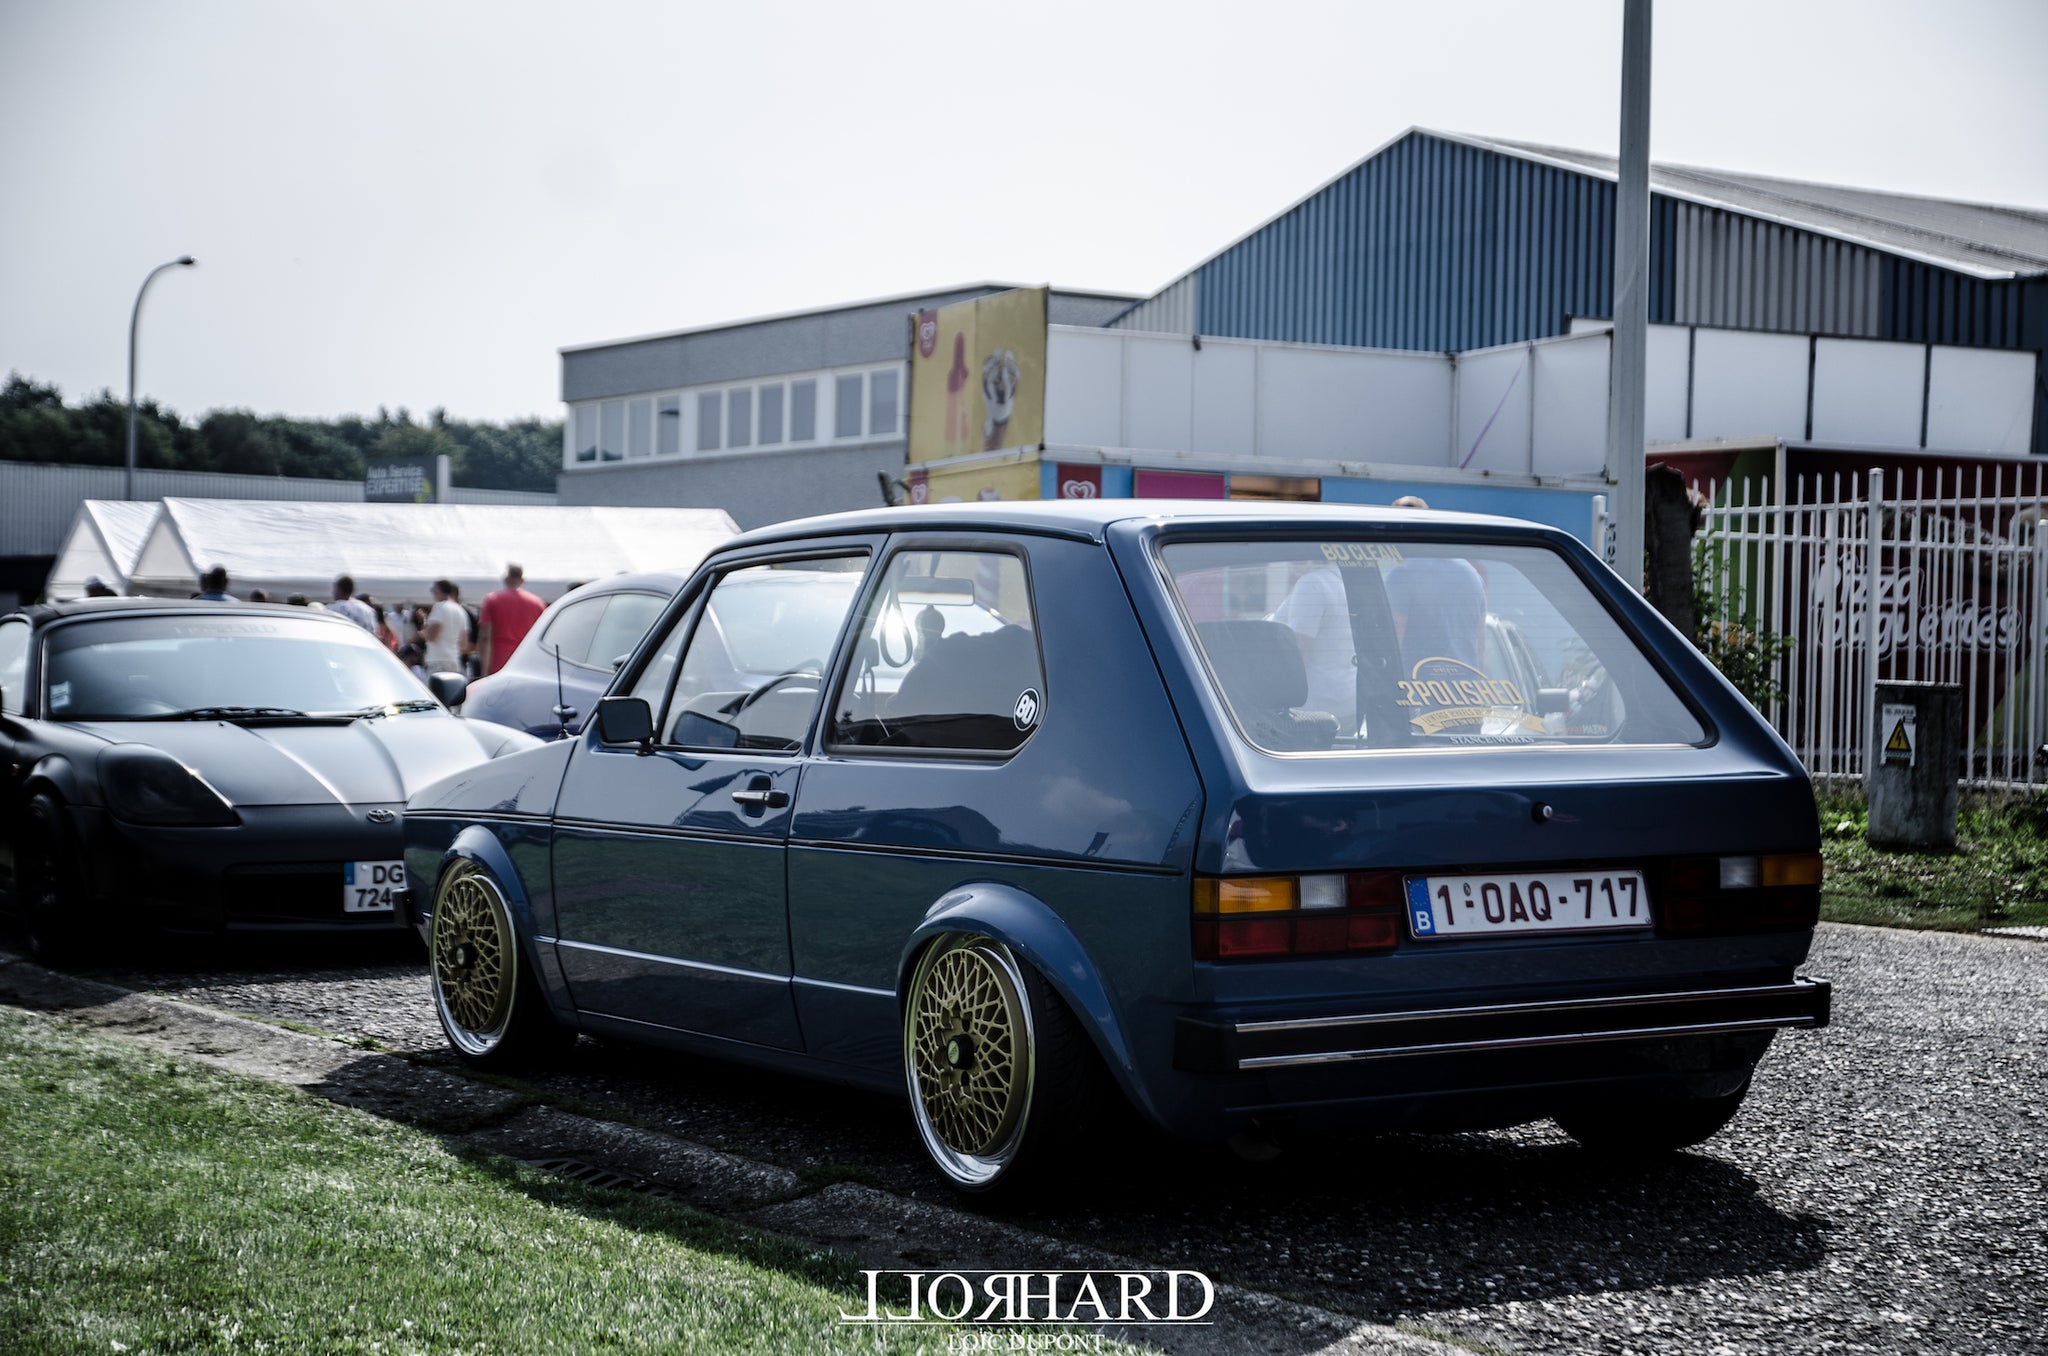 RollHard: The Belgian Chapter 2017. Loic DuPont, RollHard Show Coverage